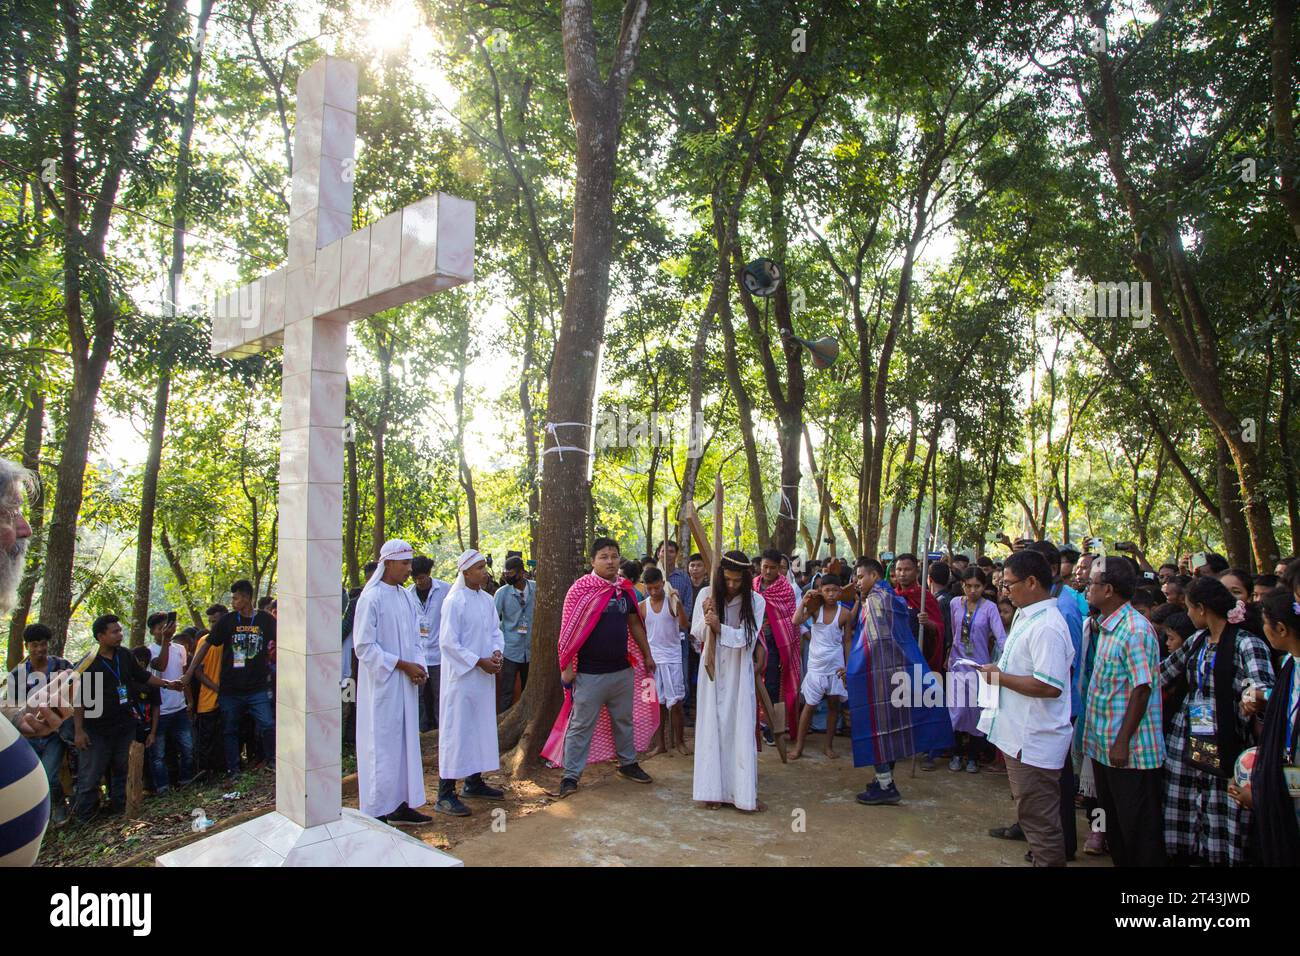 BANGLADESH Fatima Rani Pilgrimage was held at St. Leo’s Church in Mymensingh diocese in Bangladesh's northeastern Sherpur district on October 27. Stock Photo